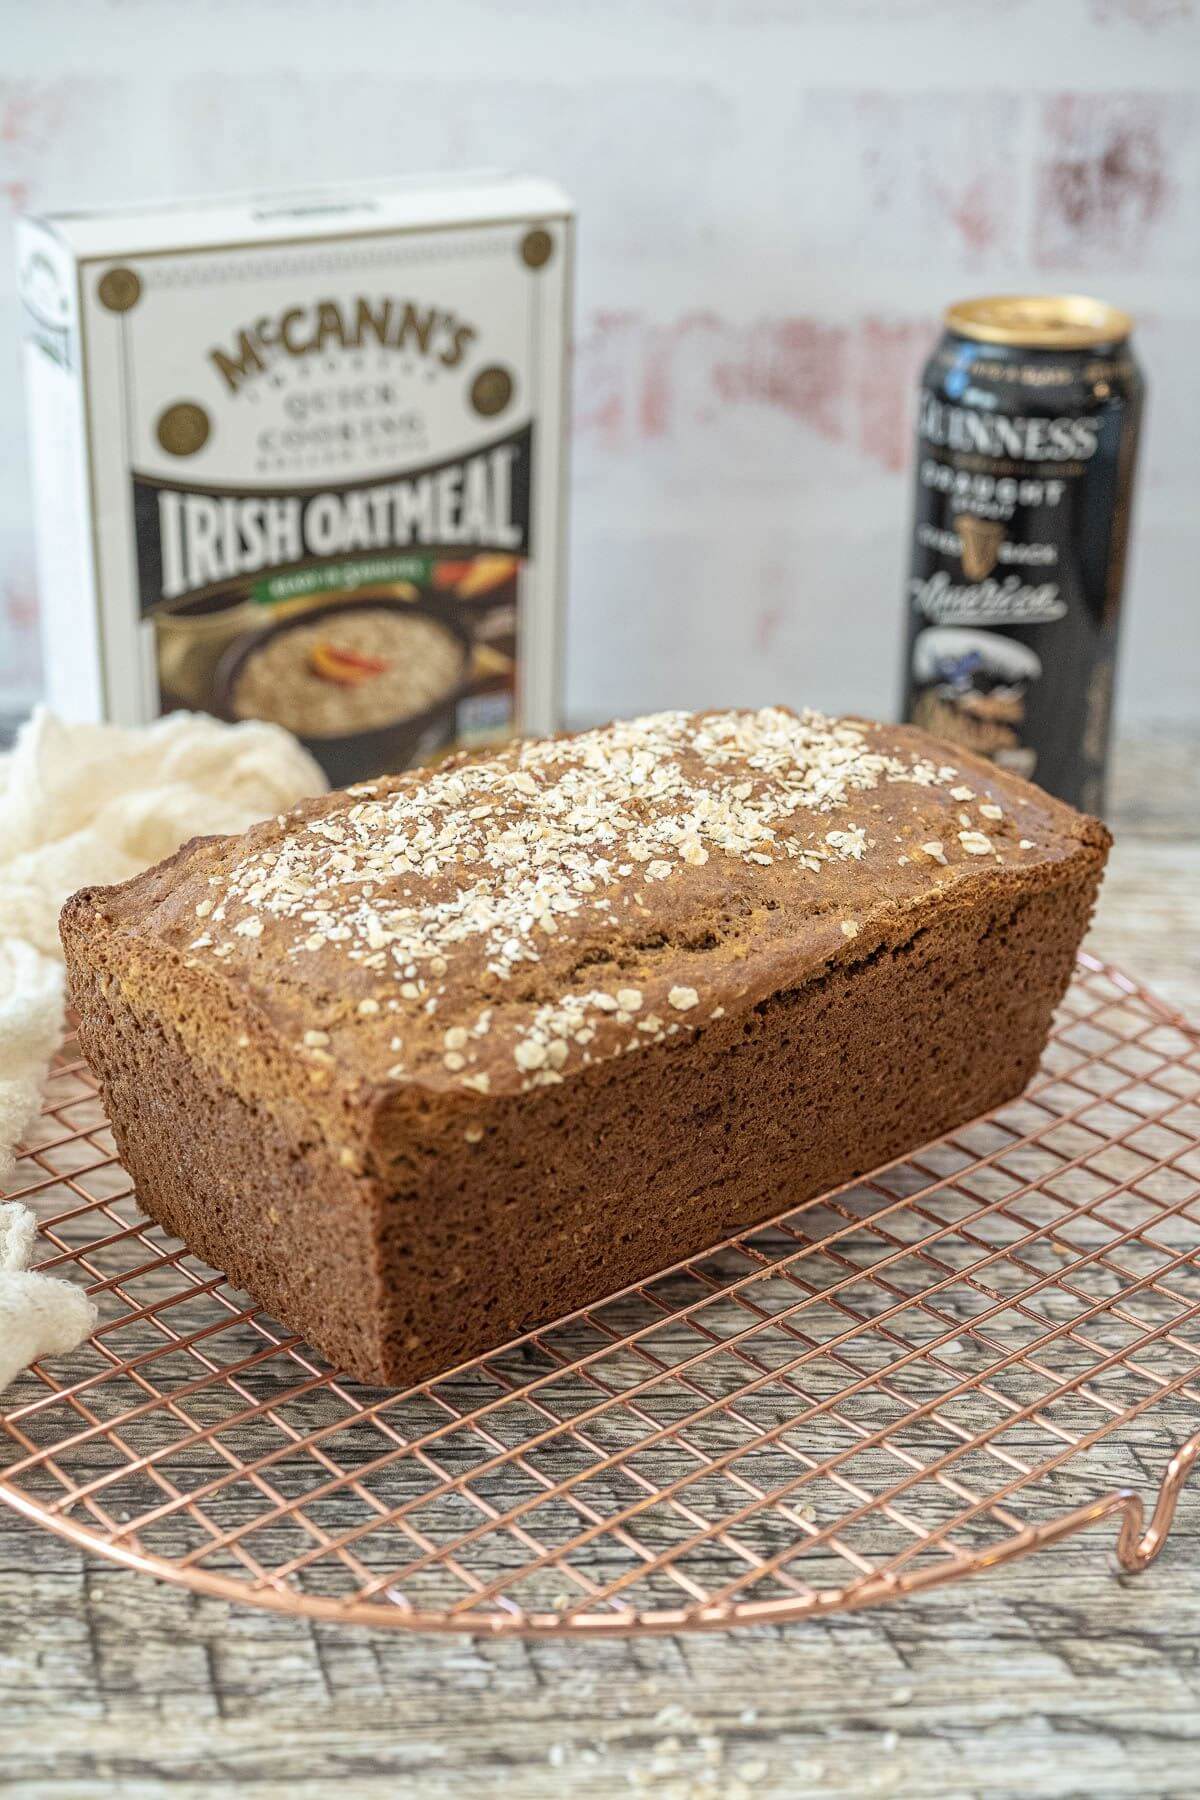 A loaf of bread rests on copper wire rack with oatmeal and Guinness beer behind it.